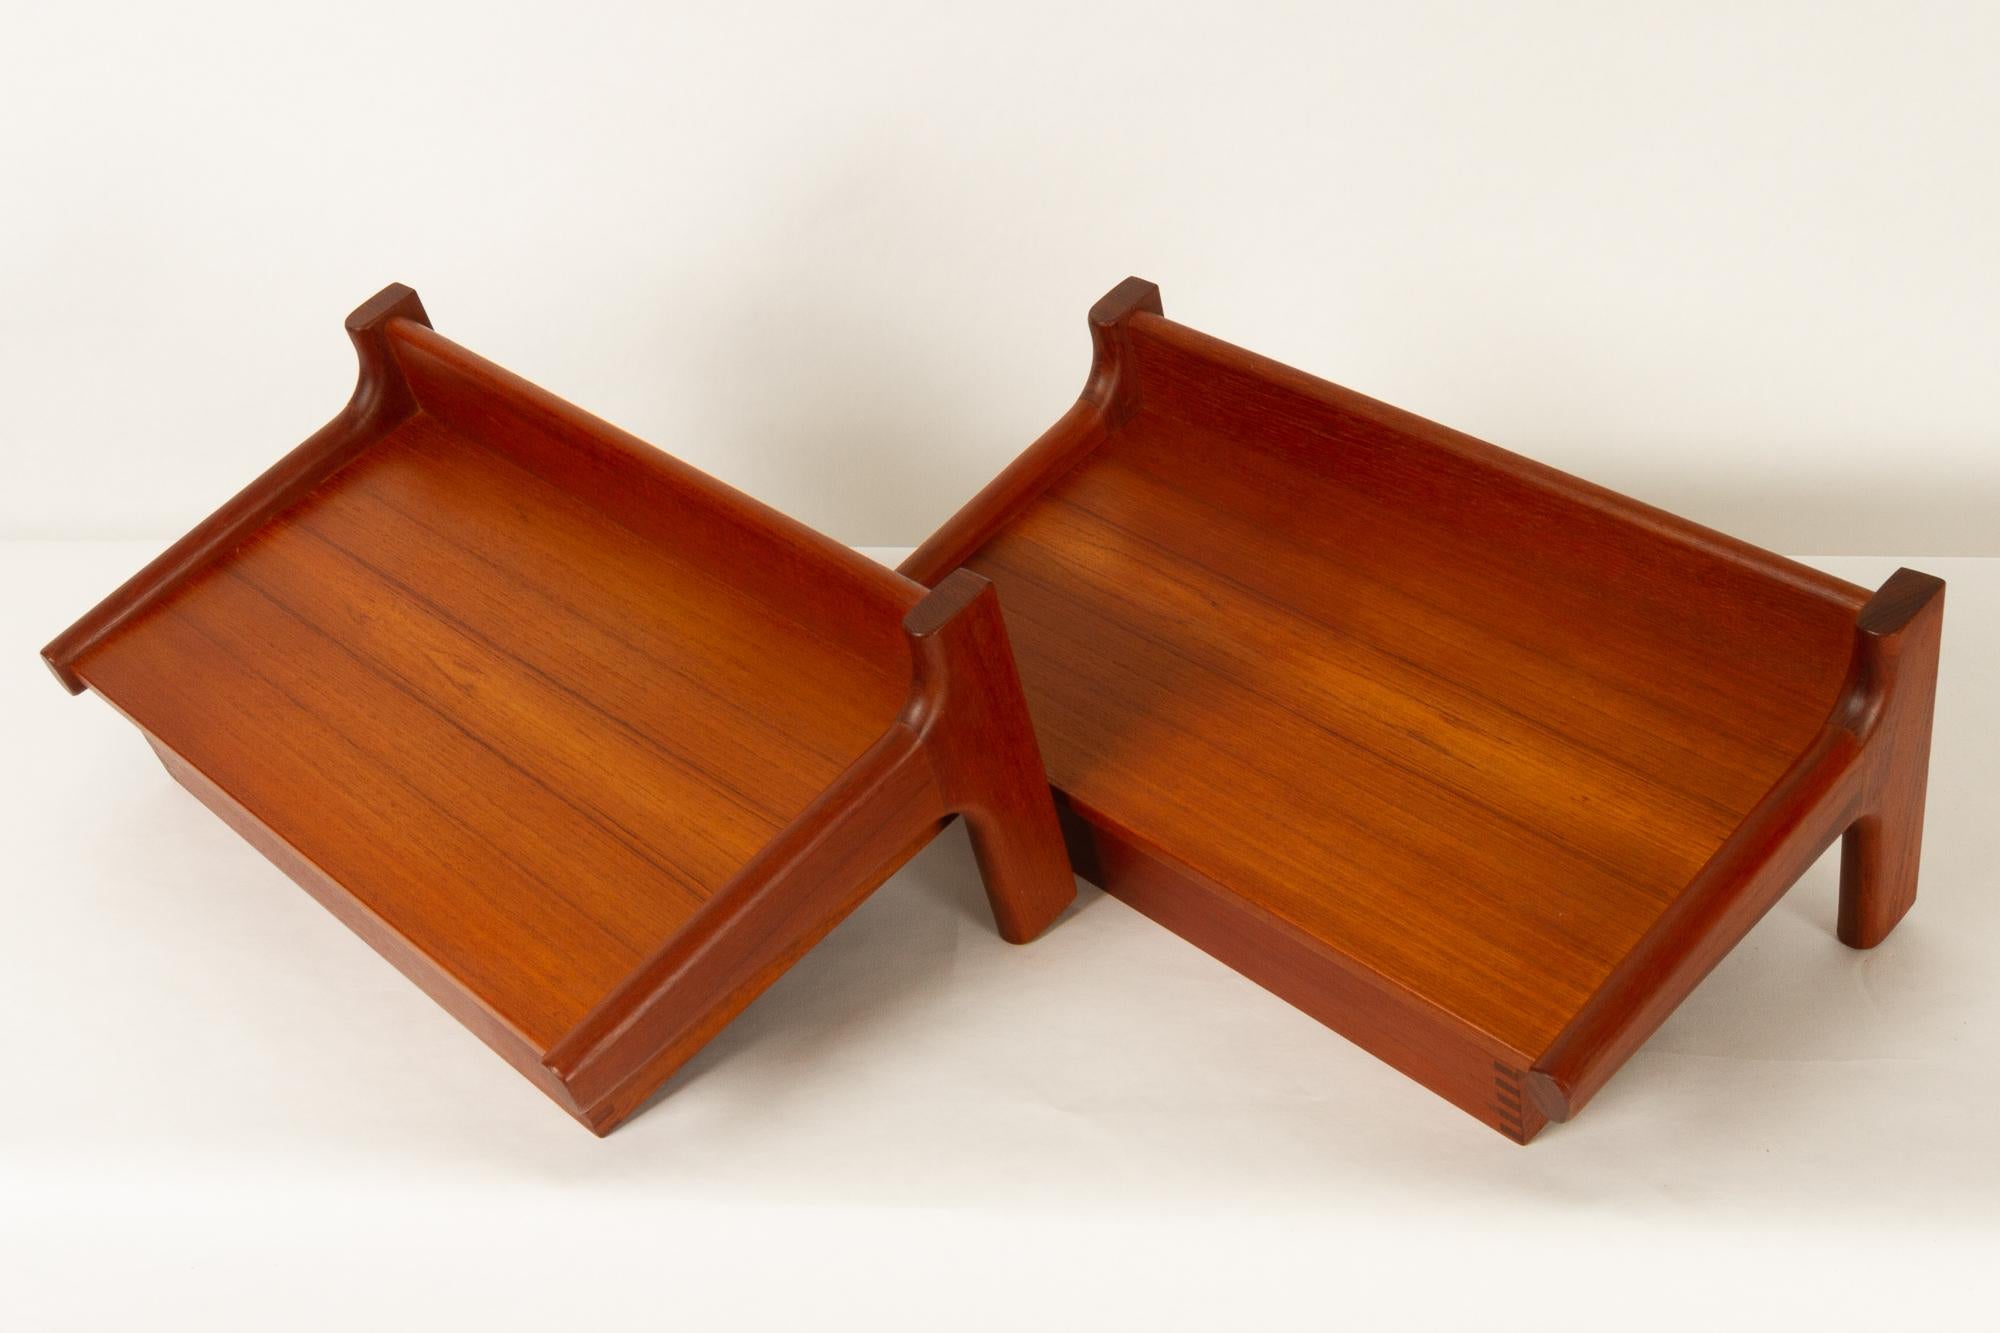 Teak bedside tables by Børge Mogensen for Søborg Møbler, 1960s.
Pair of Danish vintage wall mounted nightstands with drawers in teak.
One shelf with drawer mounted underneath. Hidden brackets for wall mounting on the back, to give them a floating